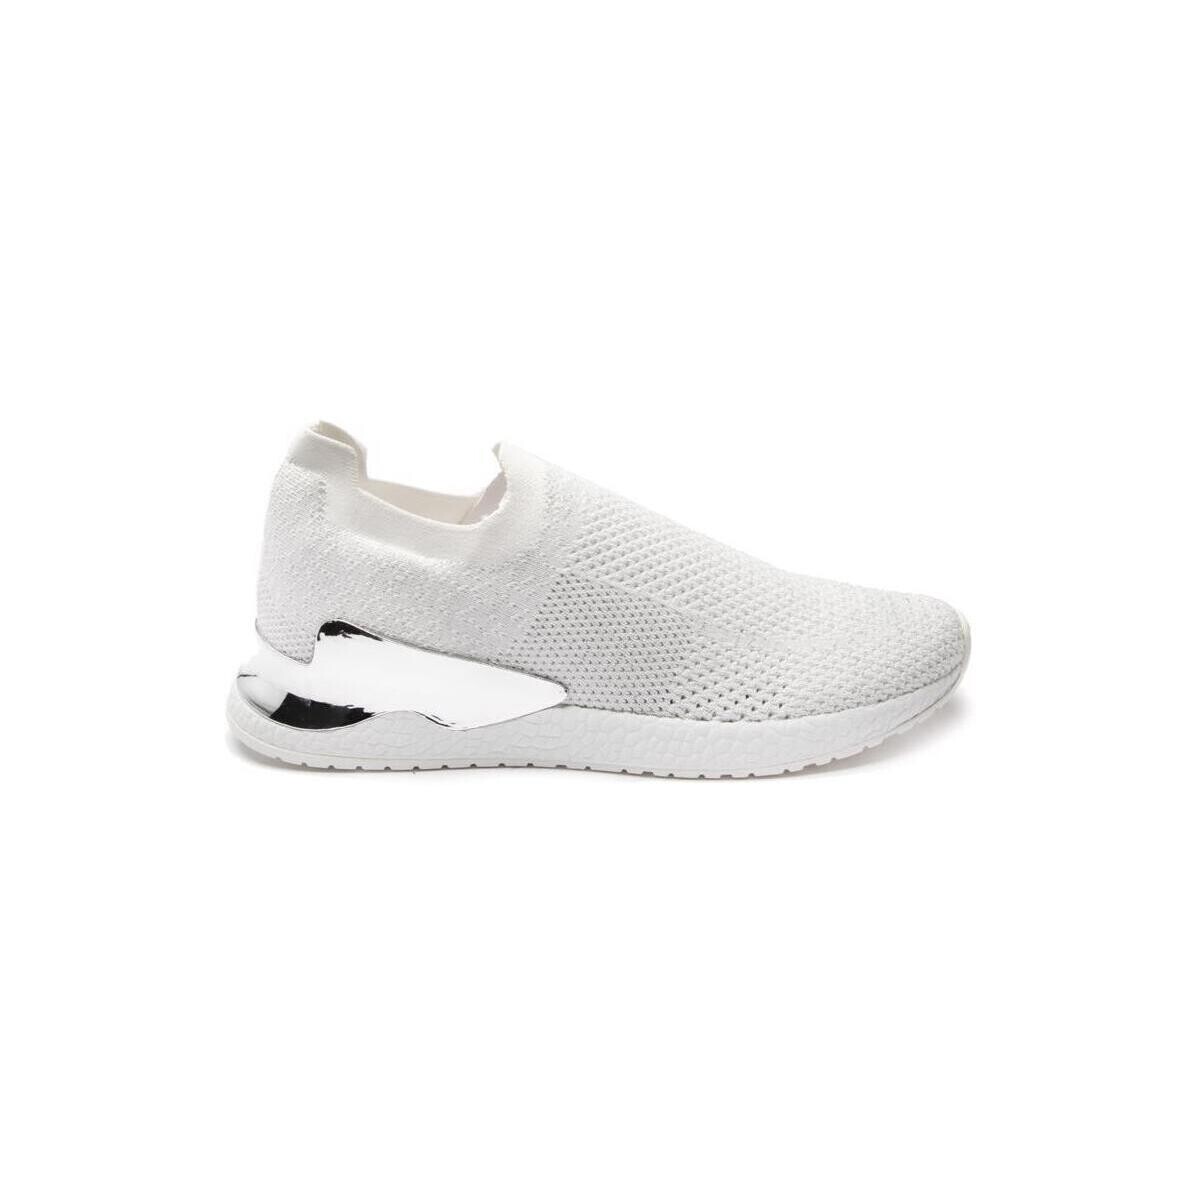 Chaussures Femme Fitness / Training Dkny Rela Slip On Baskets Chaussettes Blanc